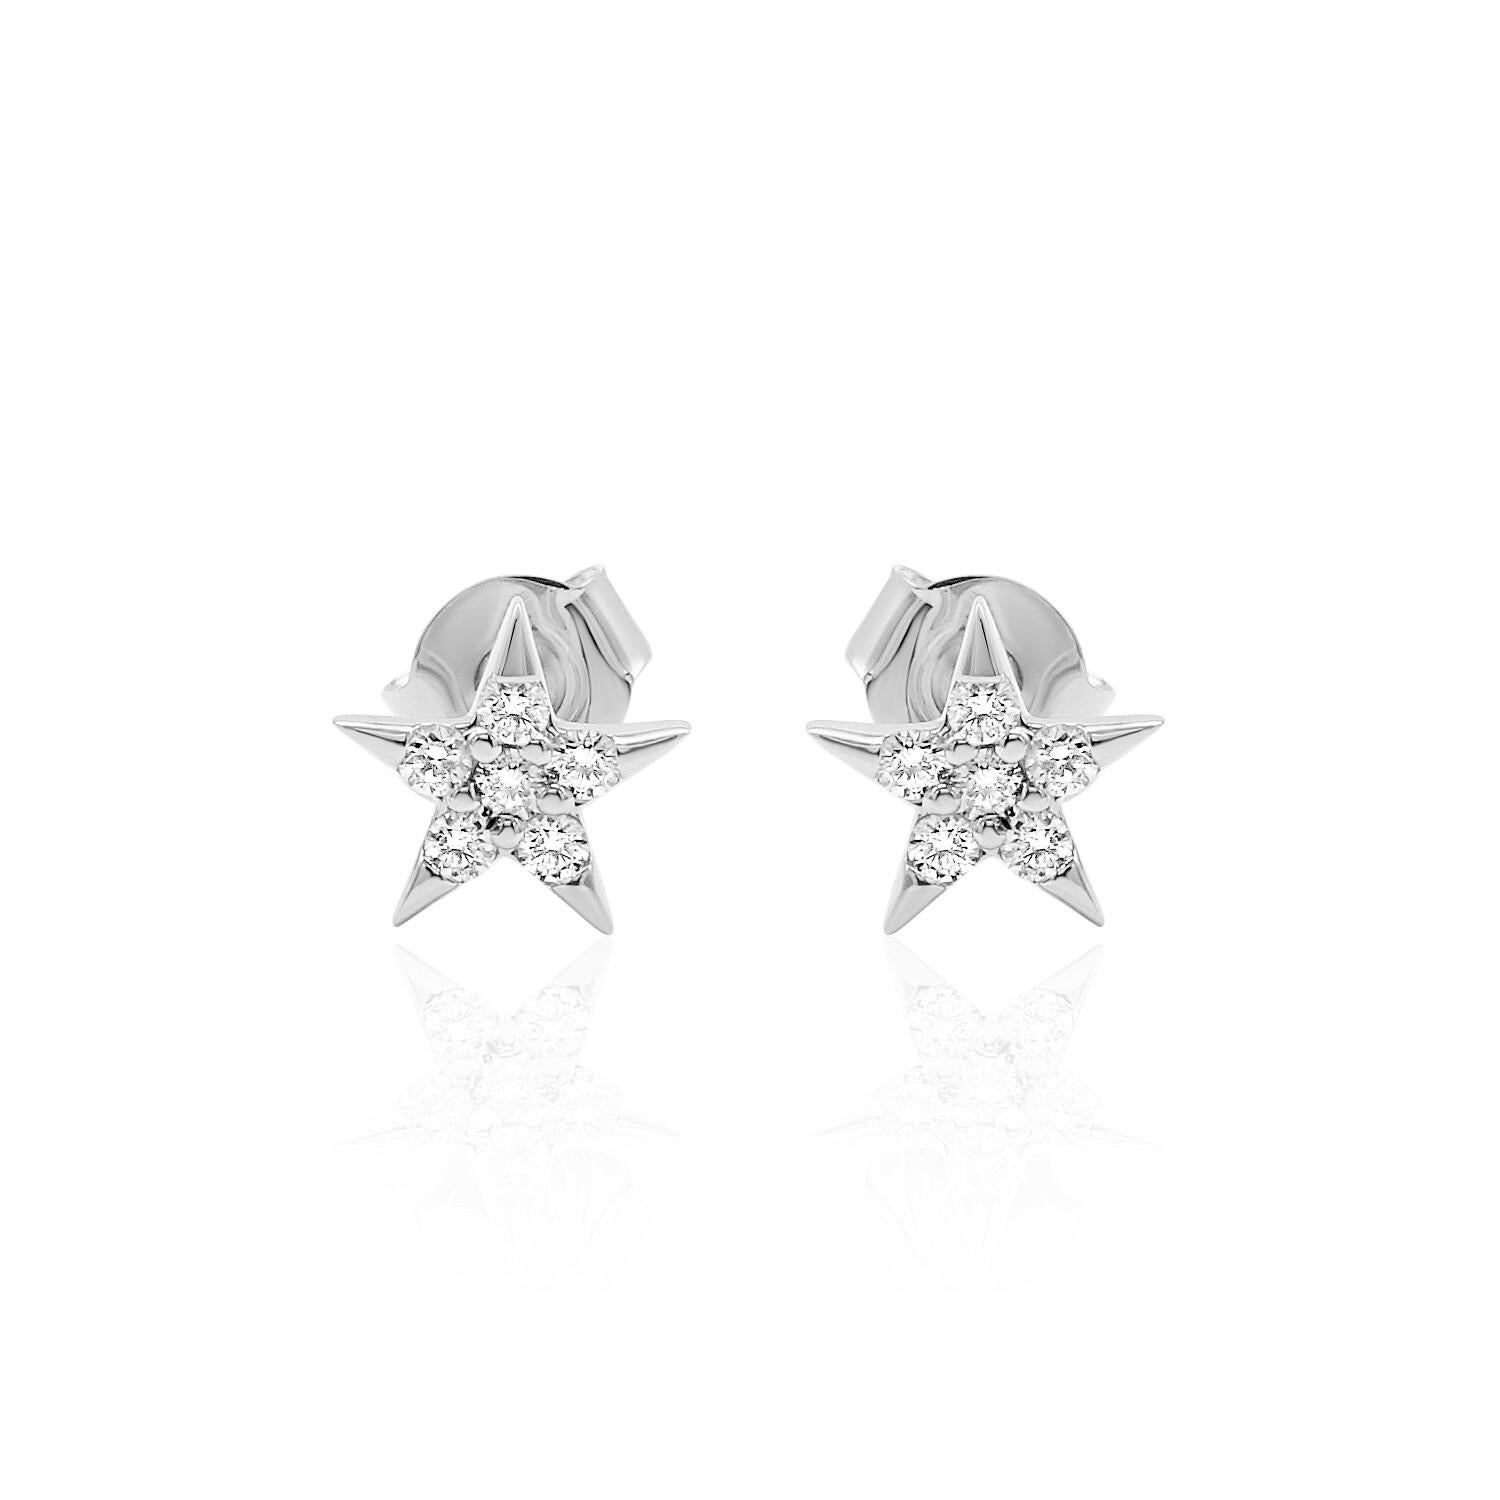 Gorgeous Star Diamond Earrings, featuring:
✧ 48 natural earth mined diamonds G-H color VS-SI weighing 0.21 carats
✧ Measurements: 7.60mm*7.60mm
✧ Available in 14K White, Yellow, and Rose Gold
✧ Push back friction closure
✧ Free appraisal included